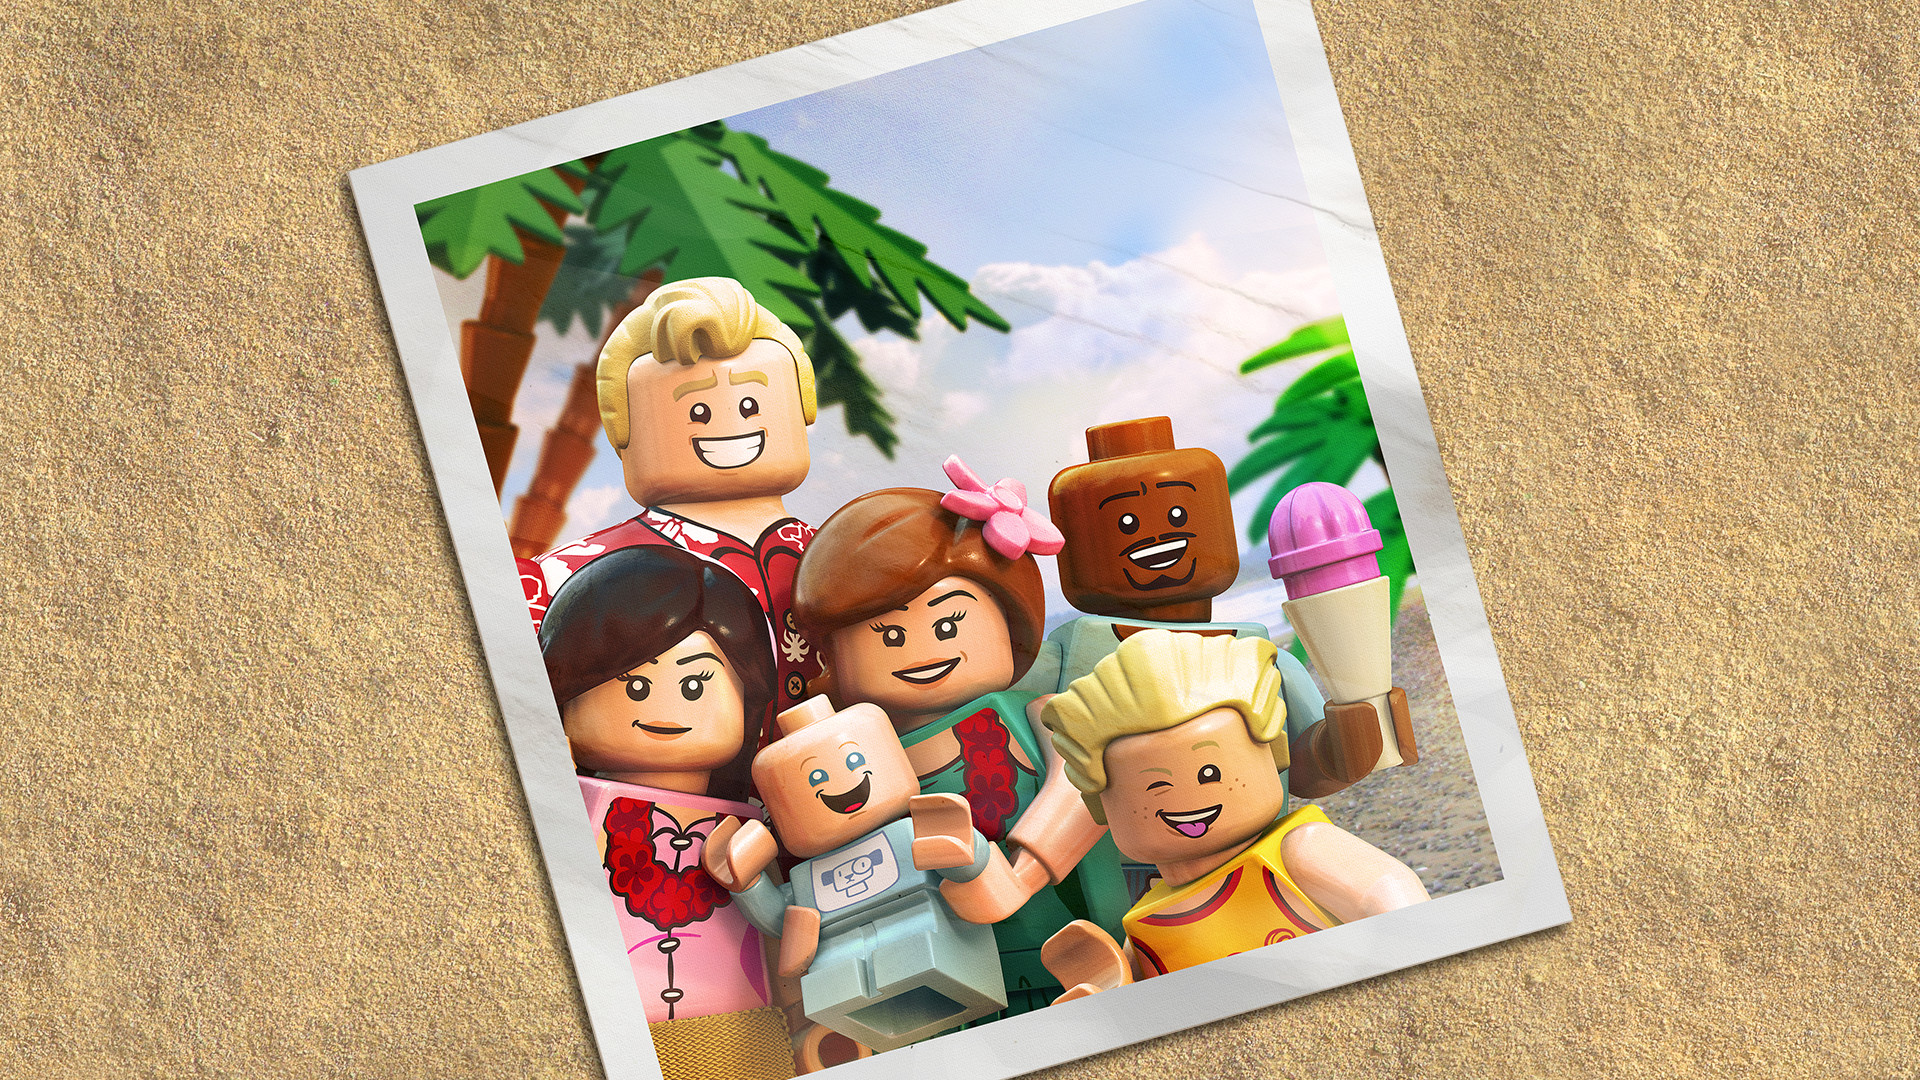 LEGO THE INCREDIBLES - Parr Family Vacation Character Pack DLC EU PS5 CD Key, 0.73$